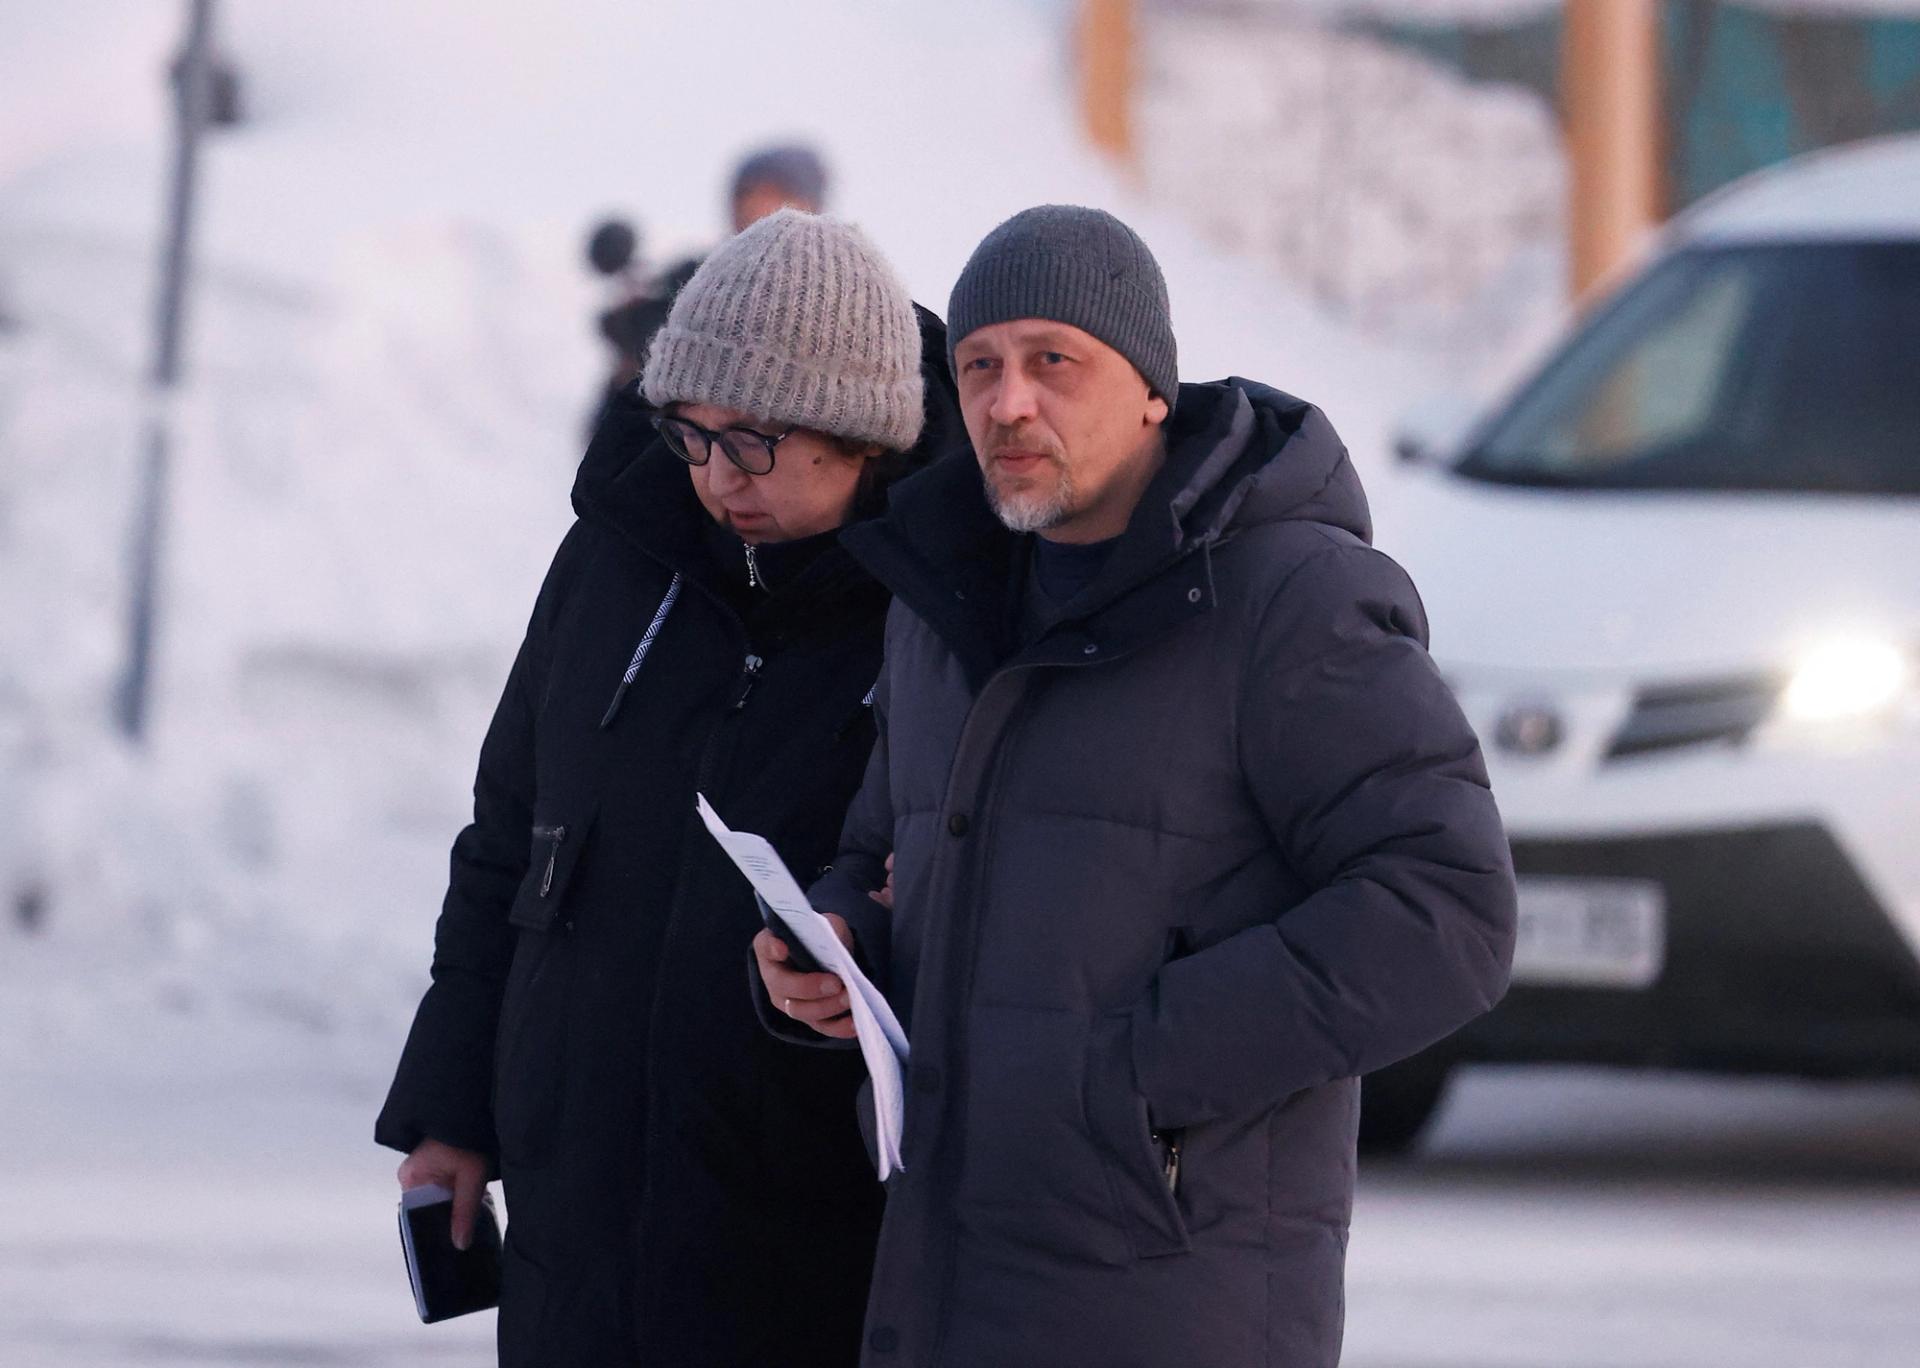 Lyudmila Navalnaya, the mother of late Russian opposition leader Alexei Navalny, and lawyer Vasily Dubkov arrive at the regional department of Russia's Investigative Committee in the town of Salekhard on February 17.